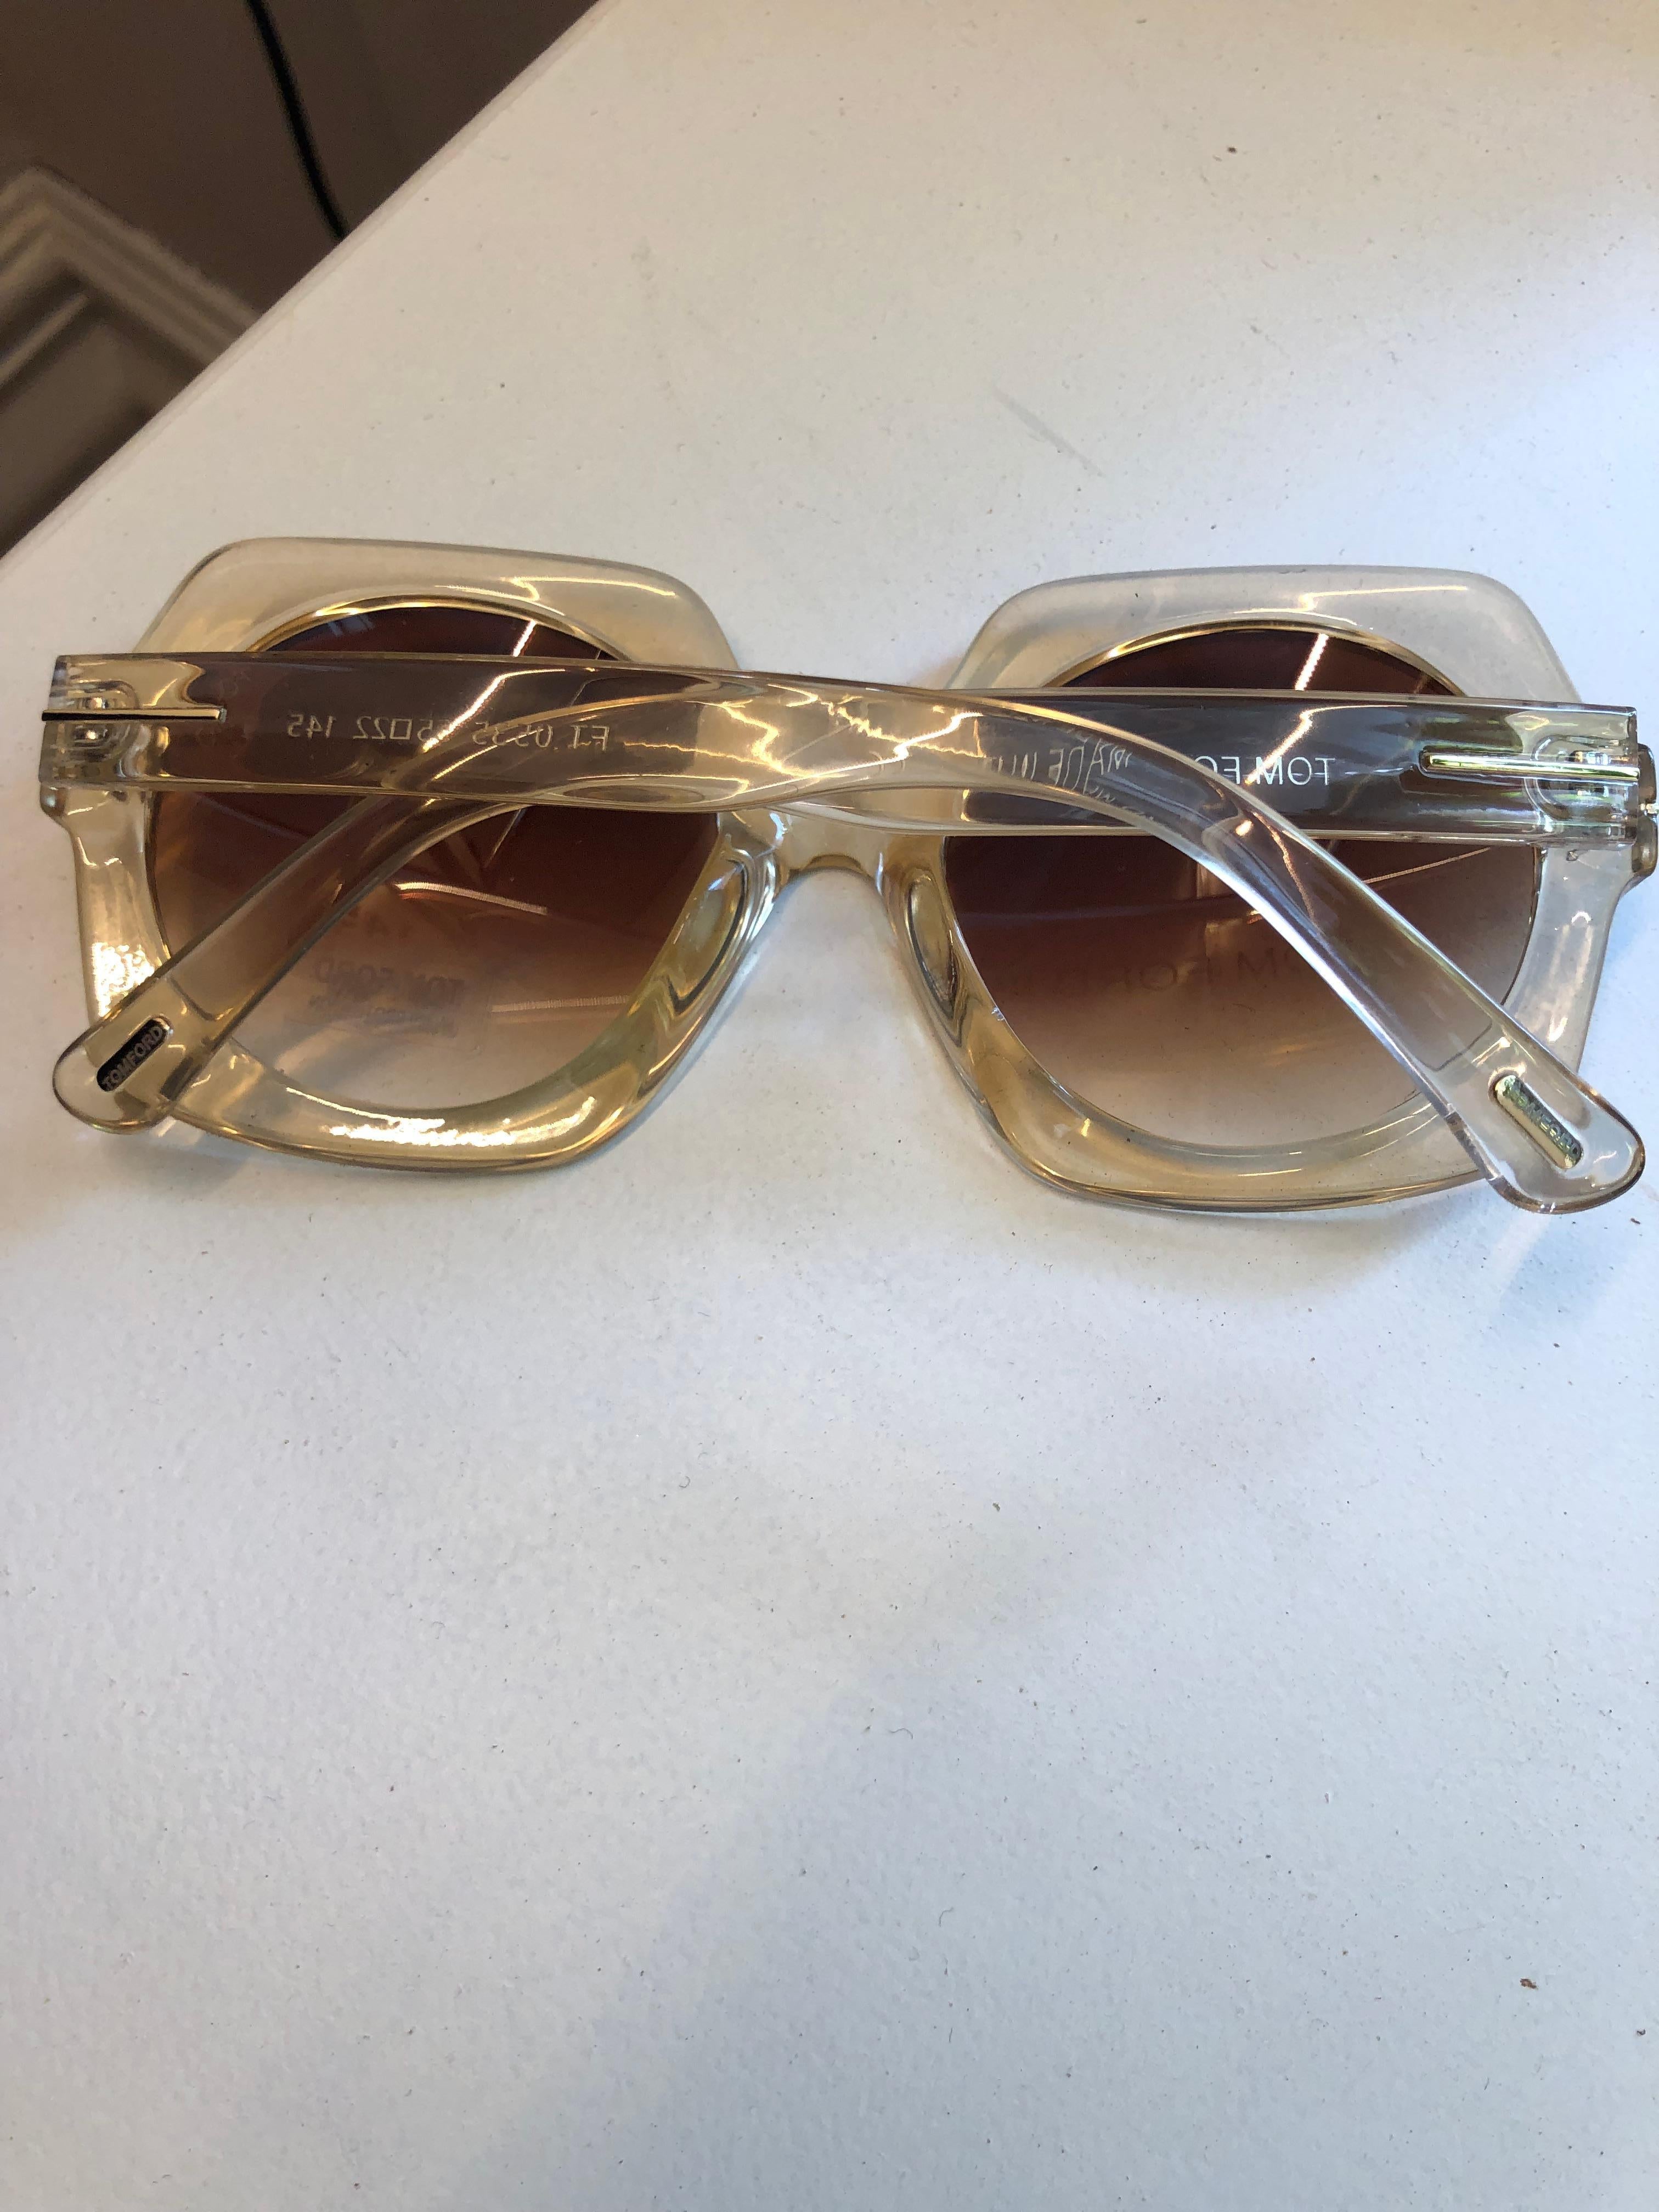 Women's Tom Ford Sofia Sunglasses FT 0535 in Pale Gold Tone Never Worn w/Case and Box